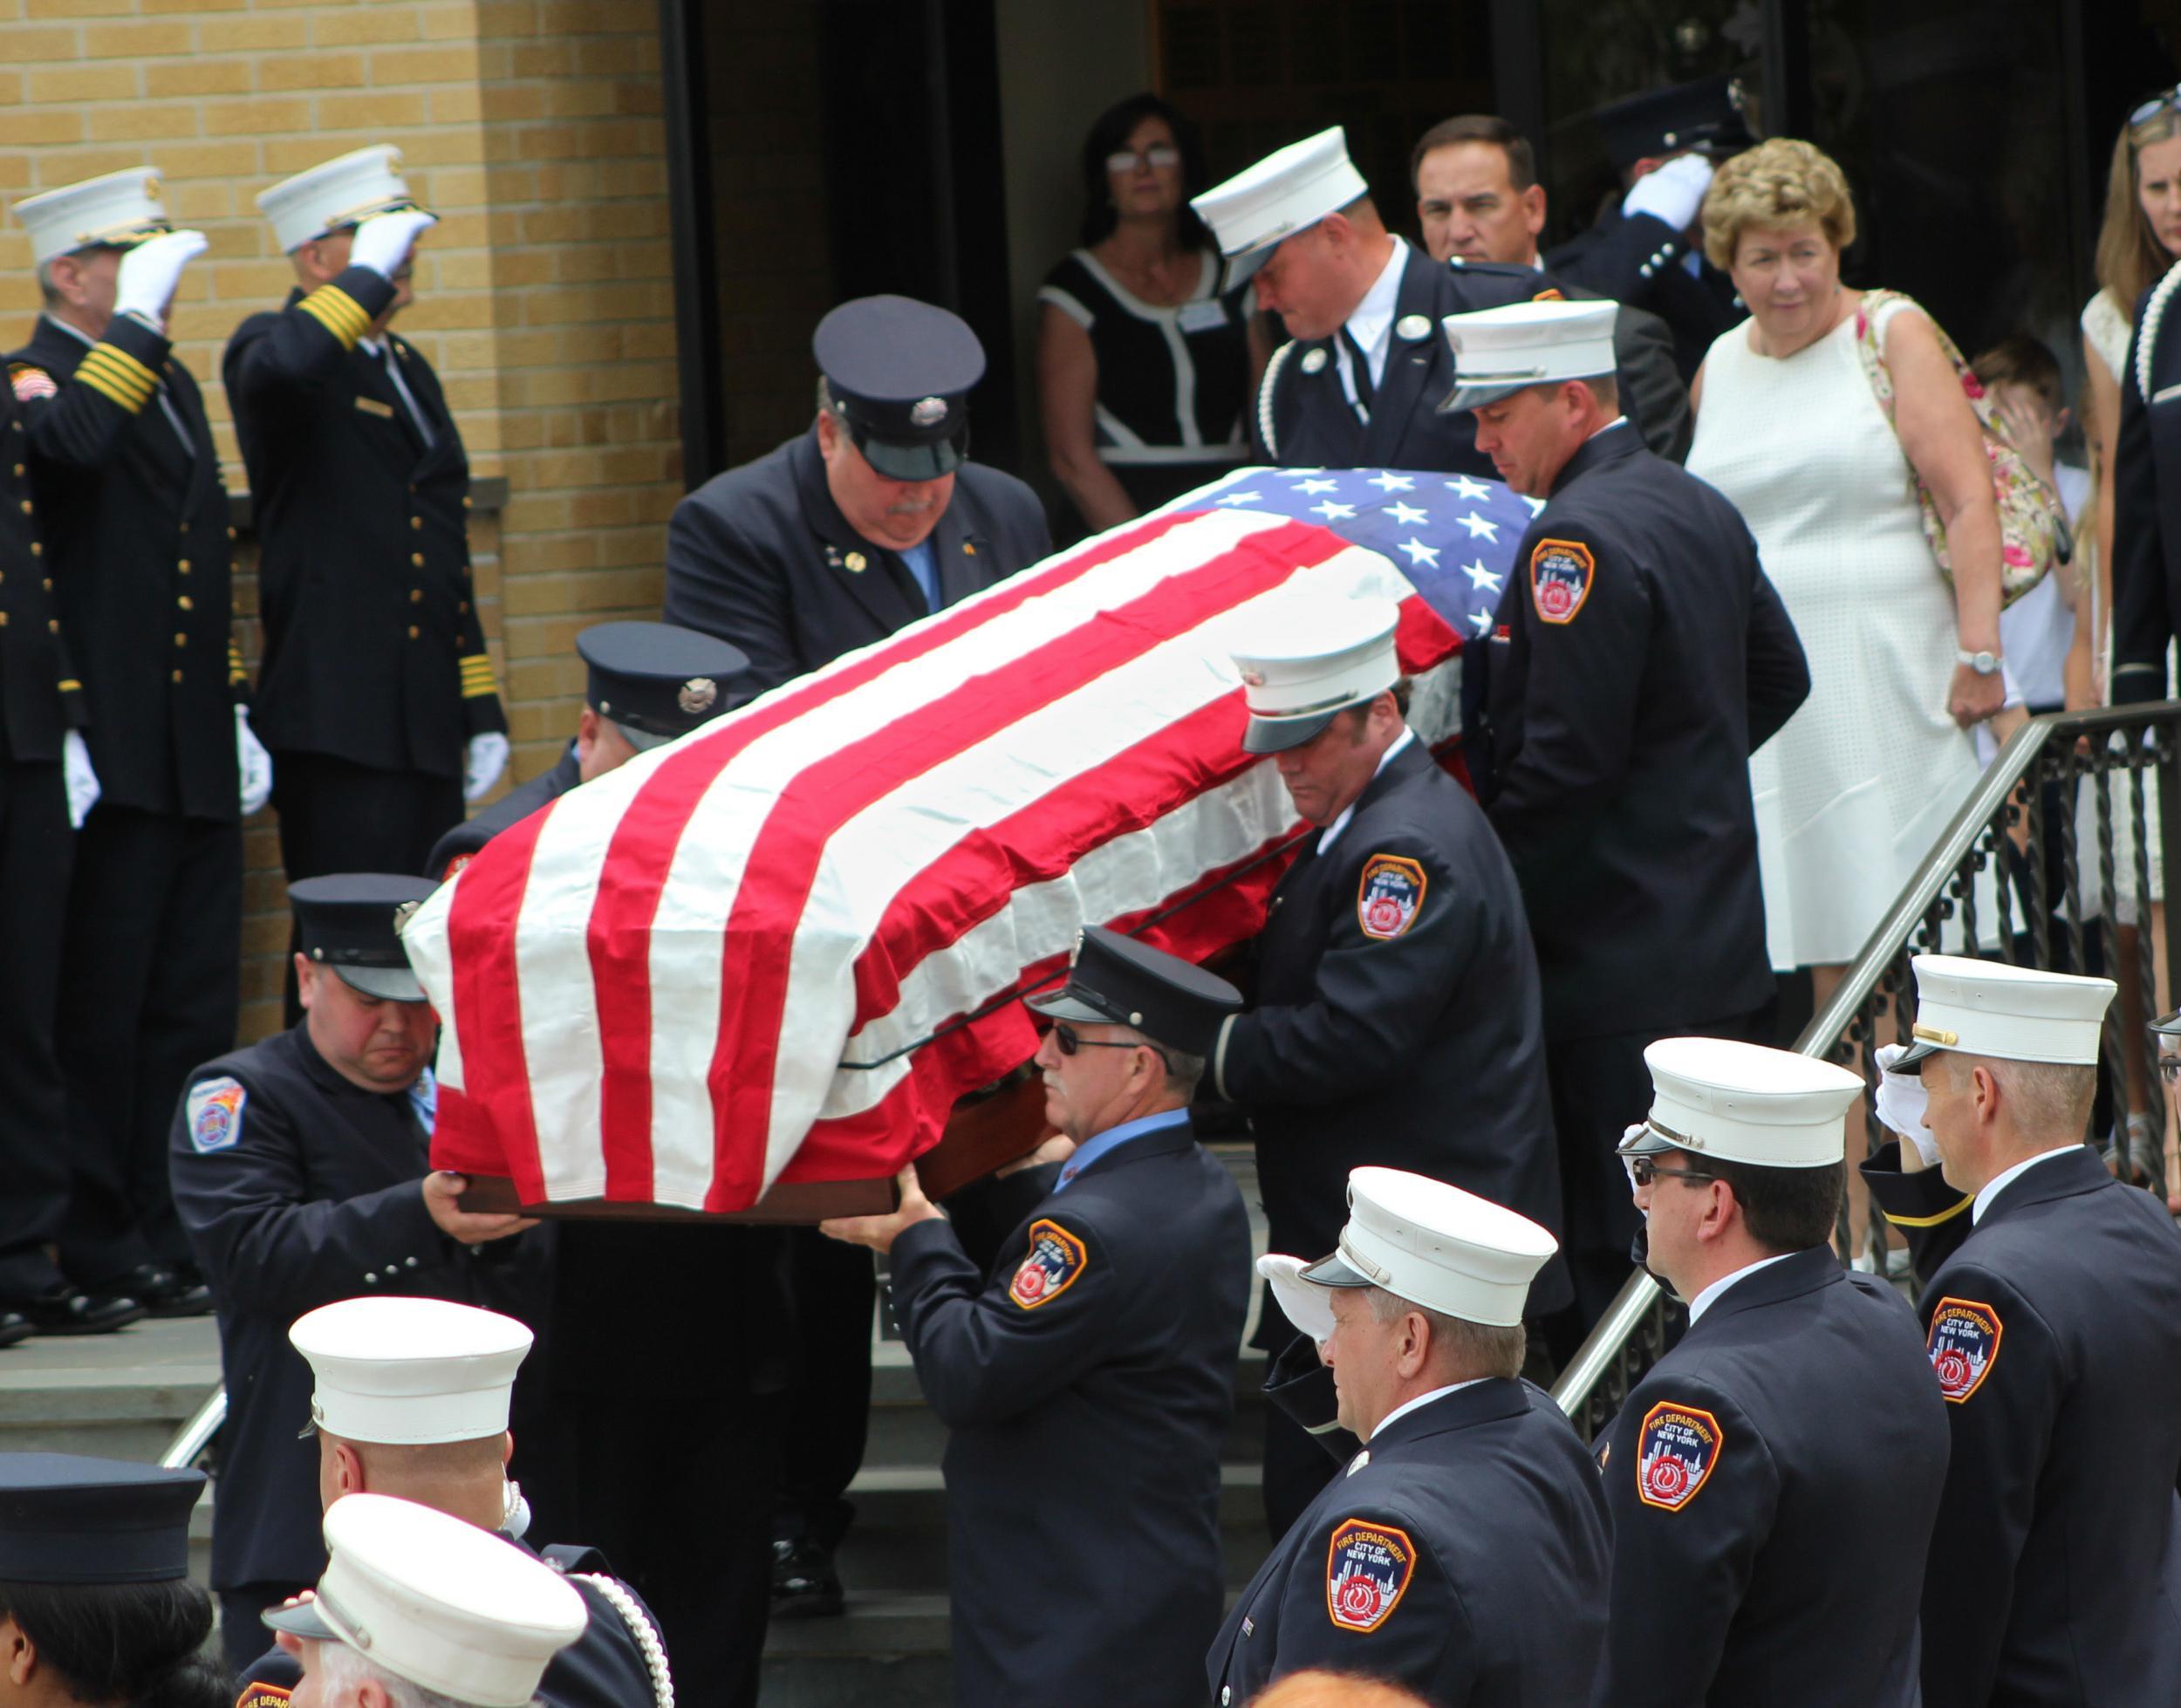 Fire Chief Killed In 9 11 Attacks Finally Given Funeral The Independent